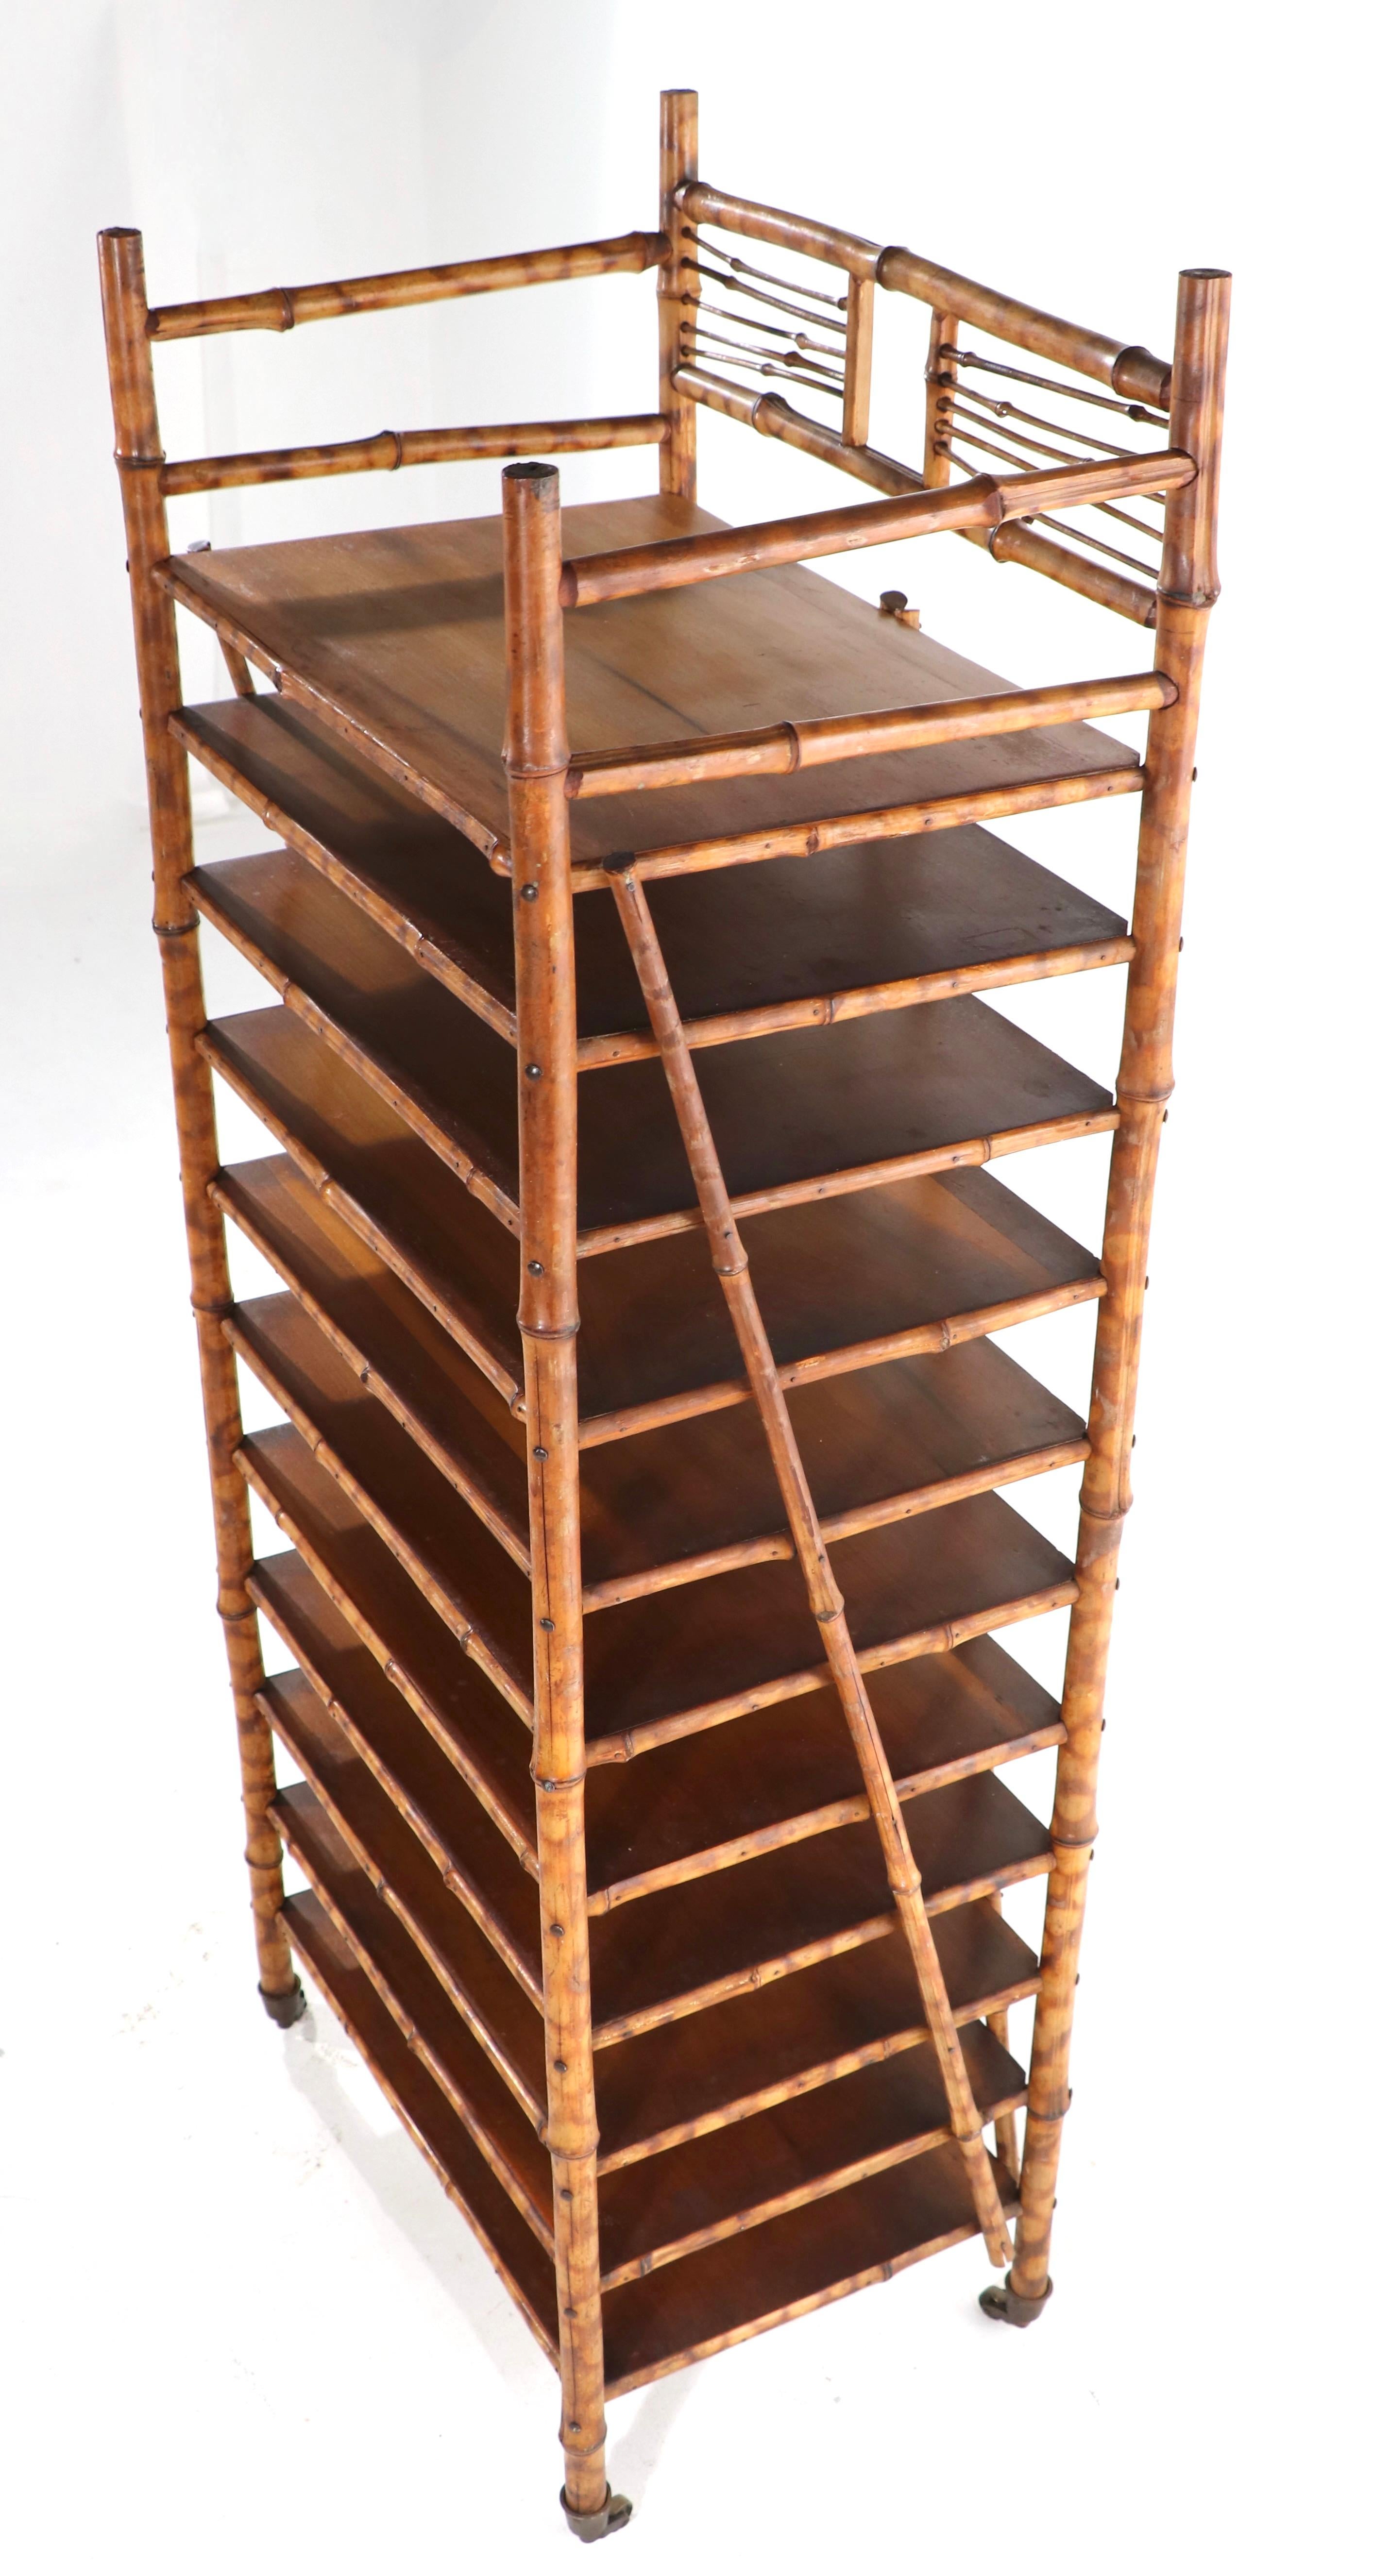 Aesthetic Movement Turn of the Century Bamboo and Wood Etagere Shelf